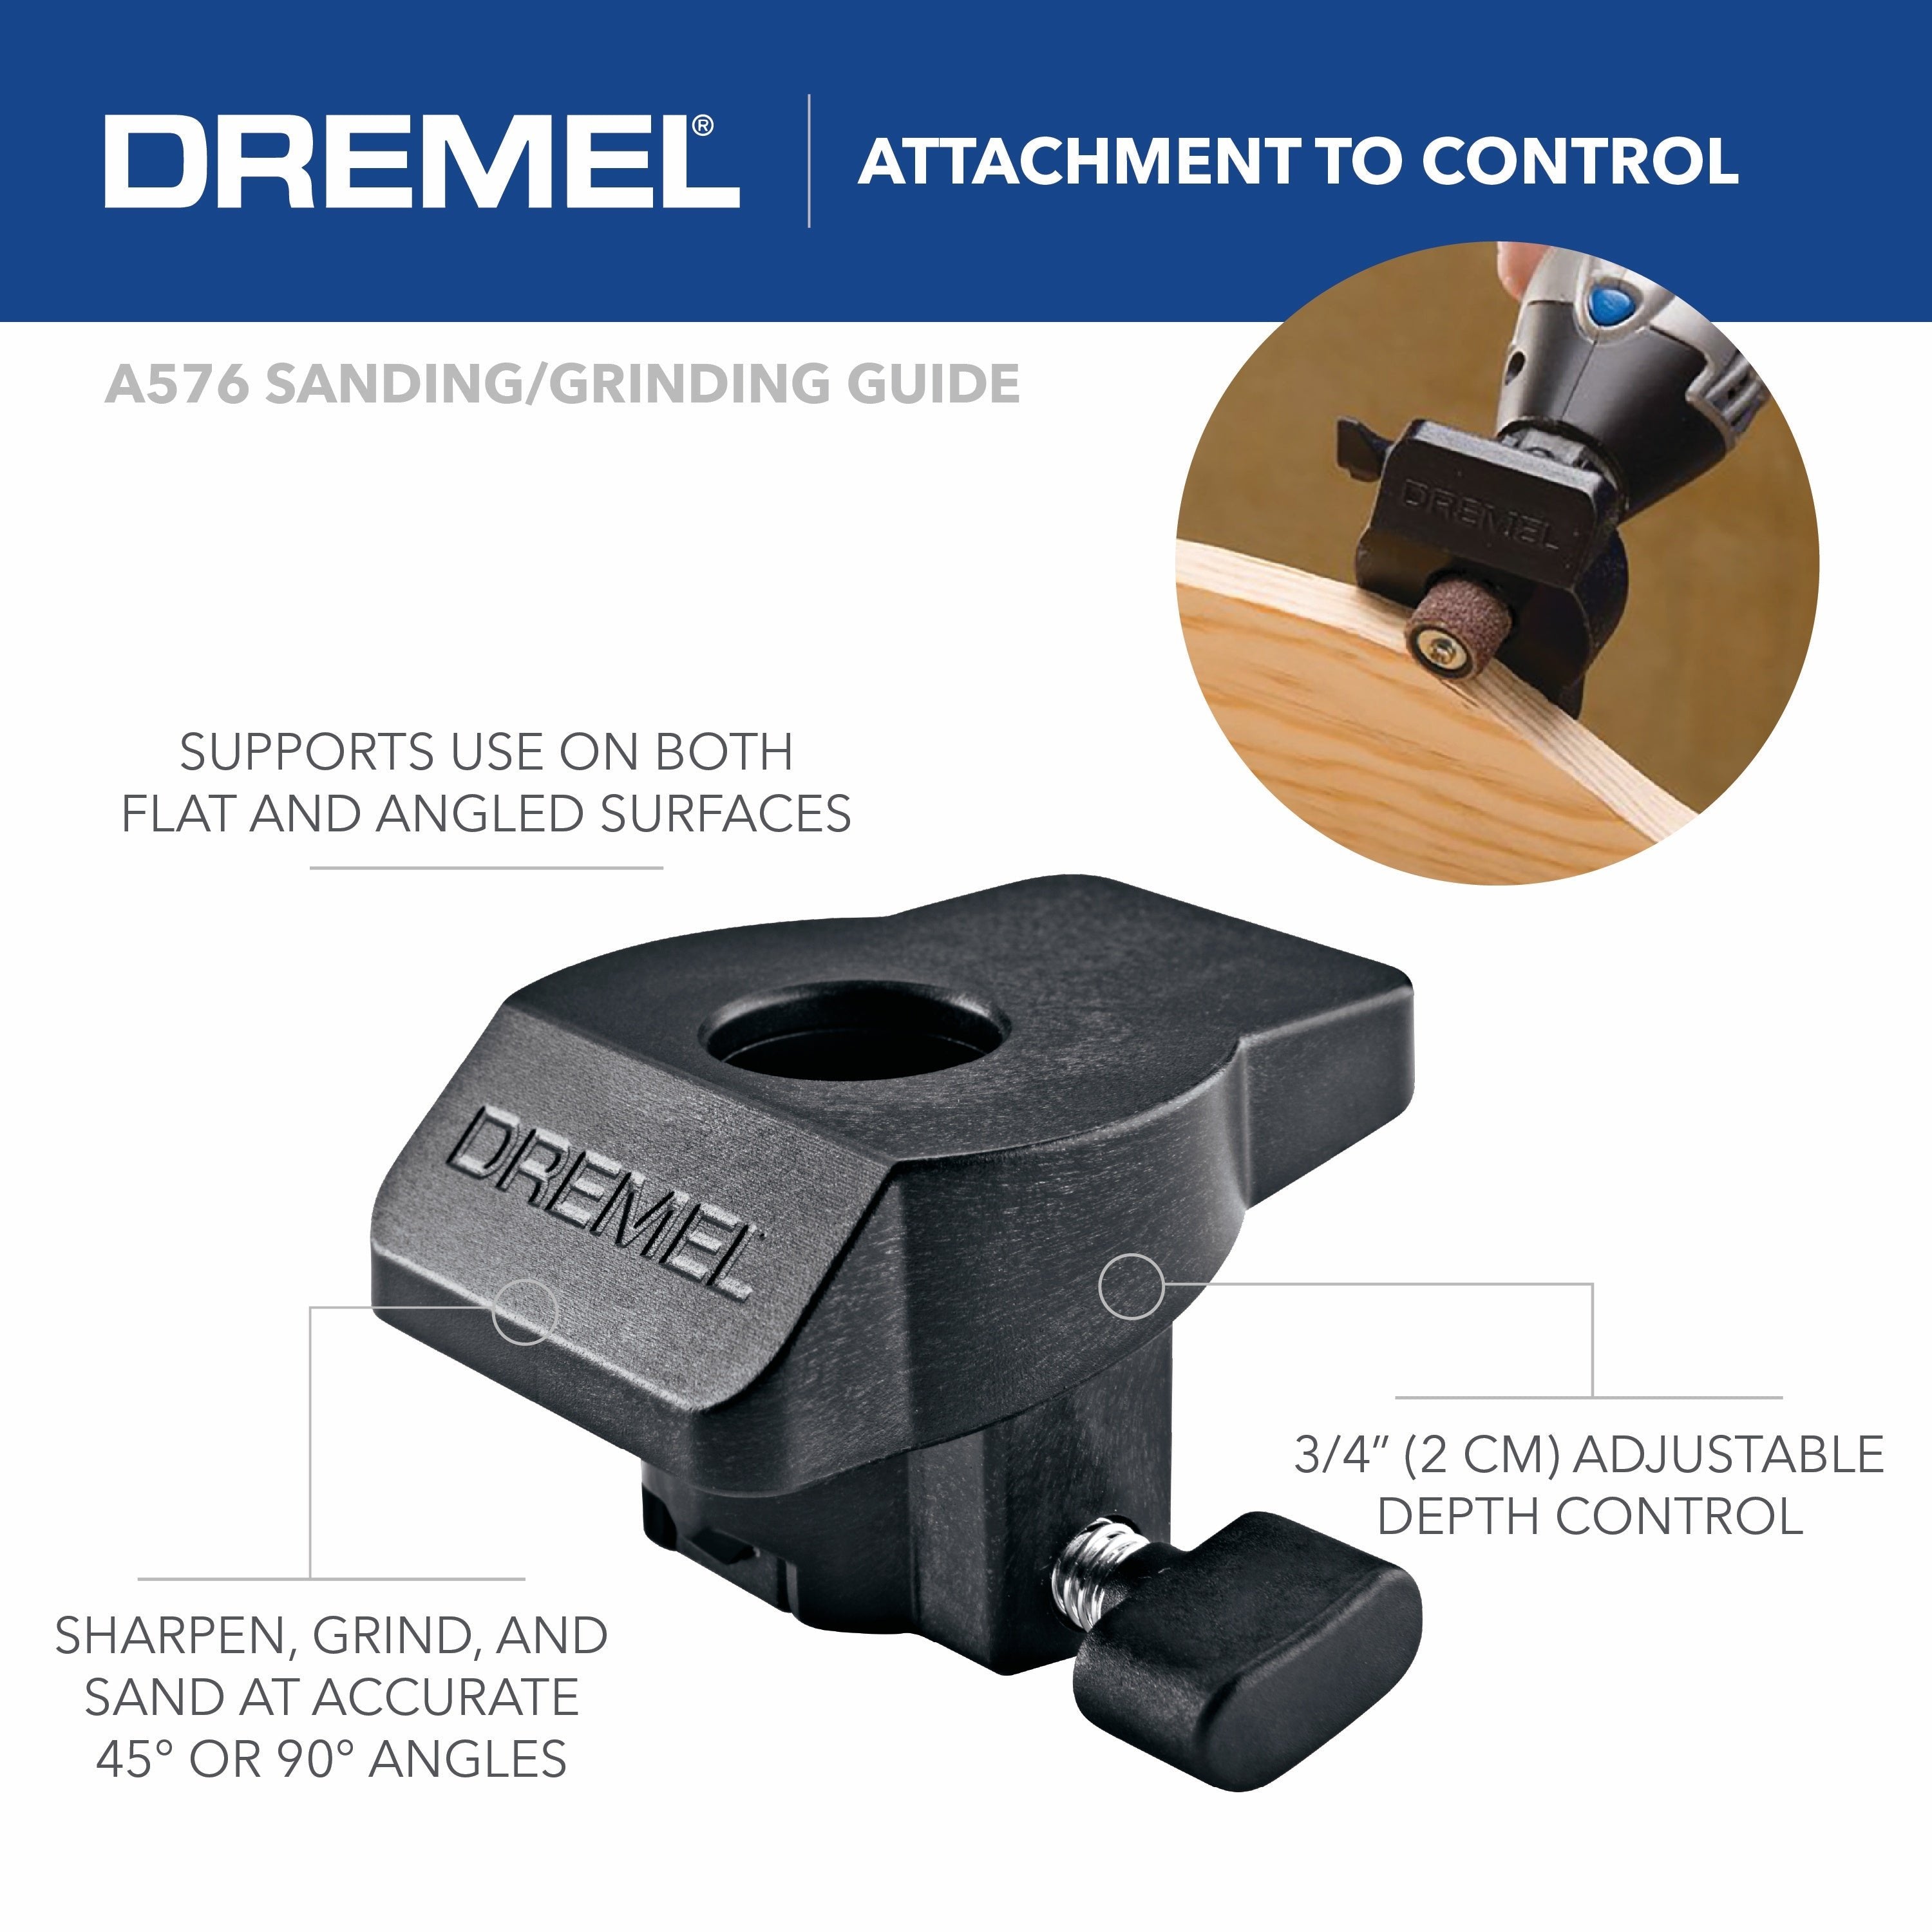 Dremel 4300-9/64 Variable Speed Rotary Tool Kit - 9 Attachments and 64 Accessories